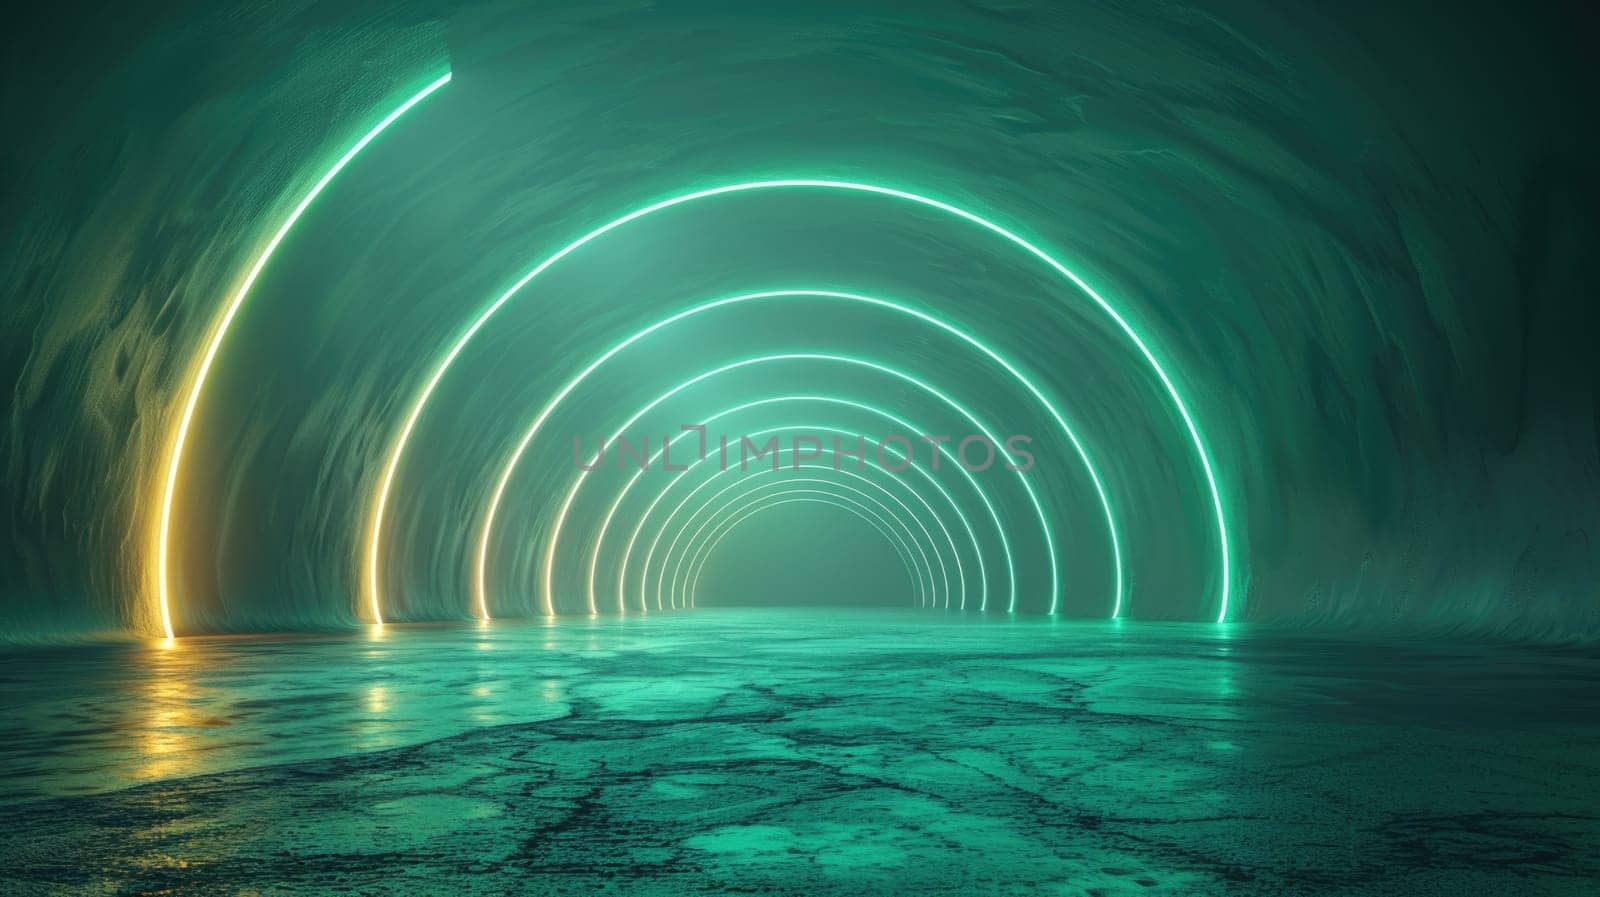 A long tunnel illuminated by neon lights, creating a vibrant and dynamic visual experience.